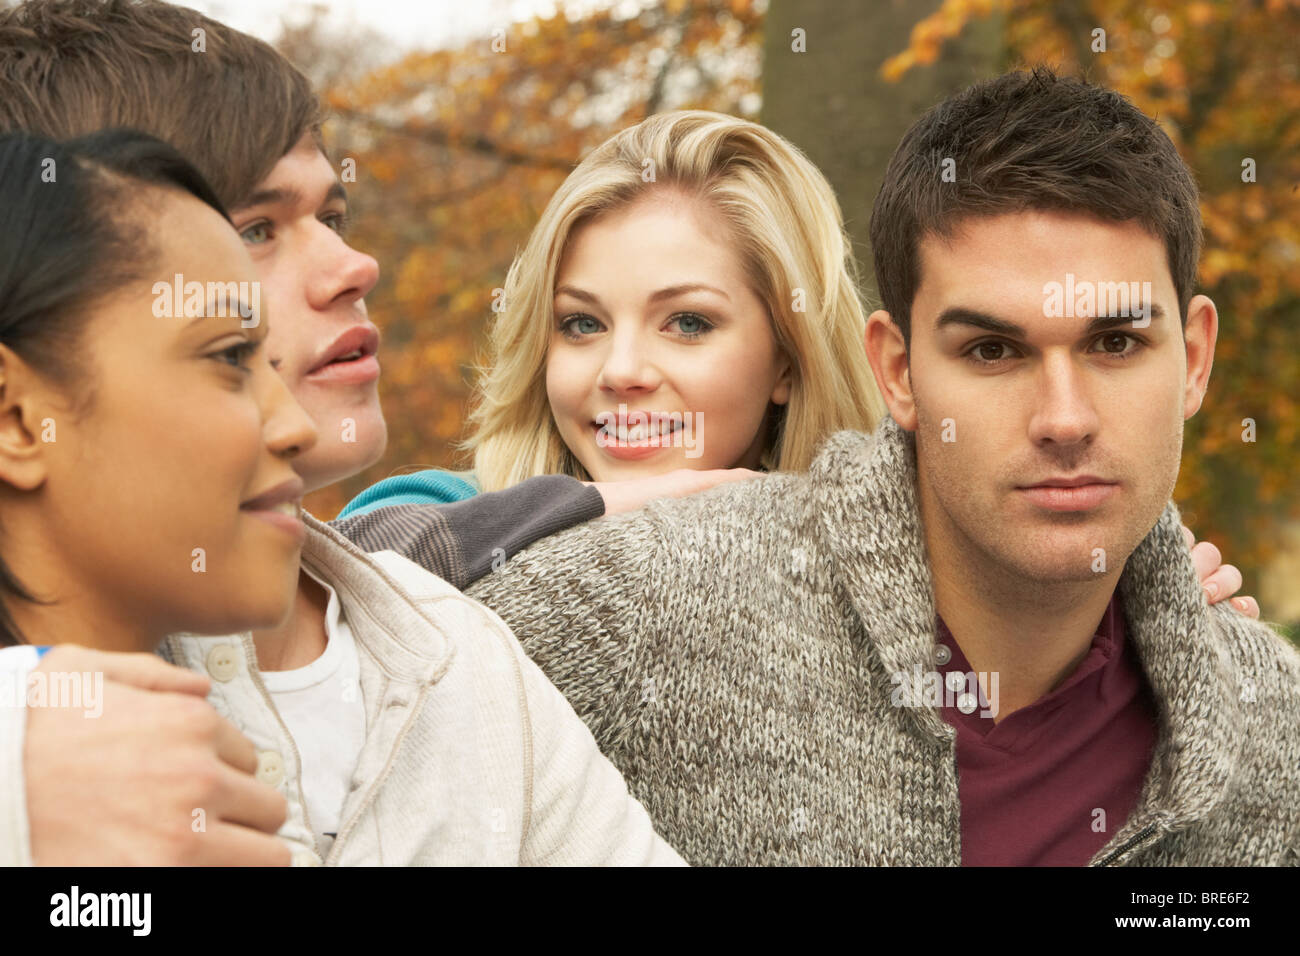 Close Up Of Group Of Four Teenage Friends In Autumn Woodland Stock Photo